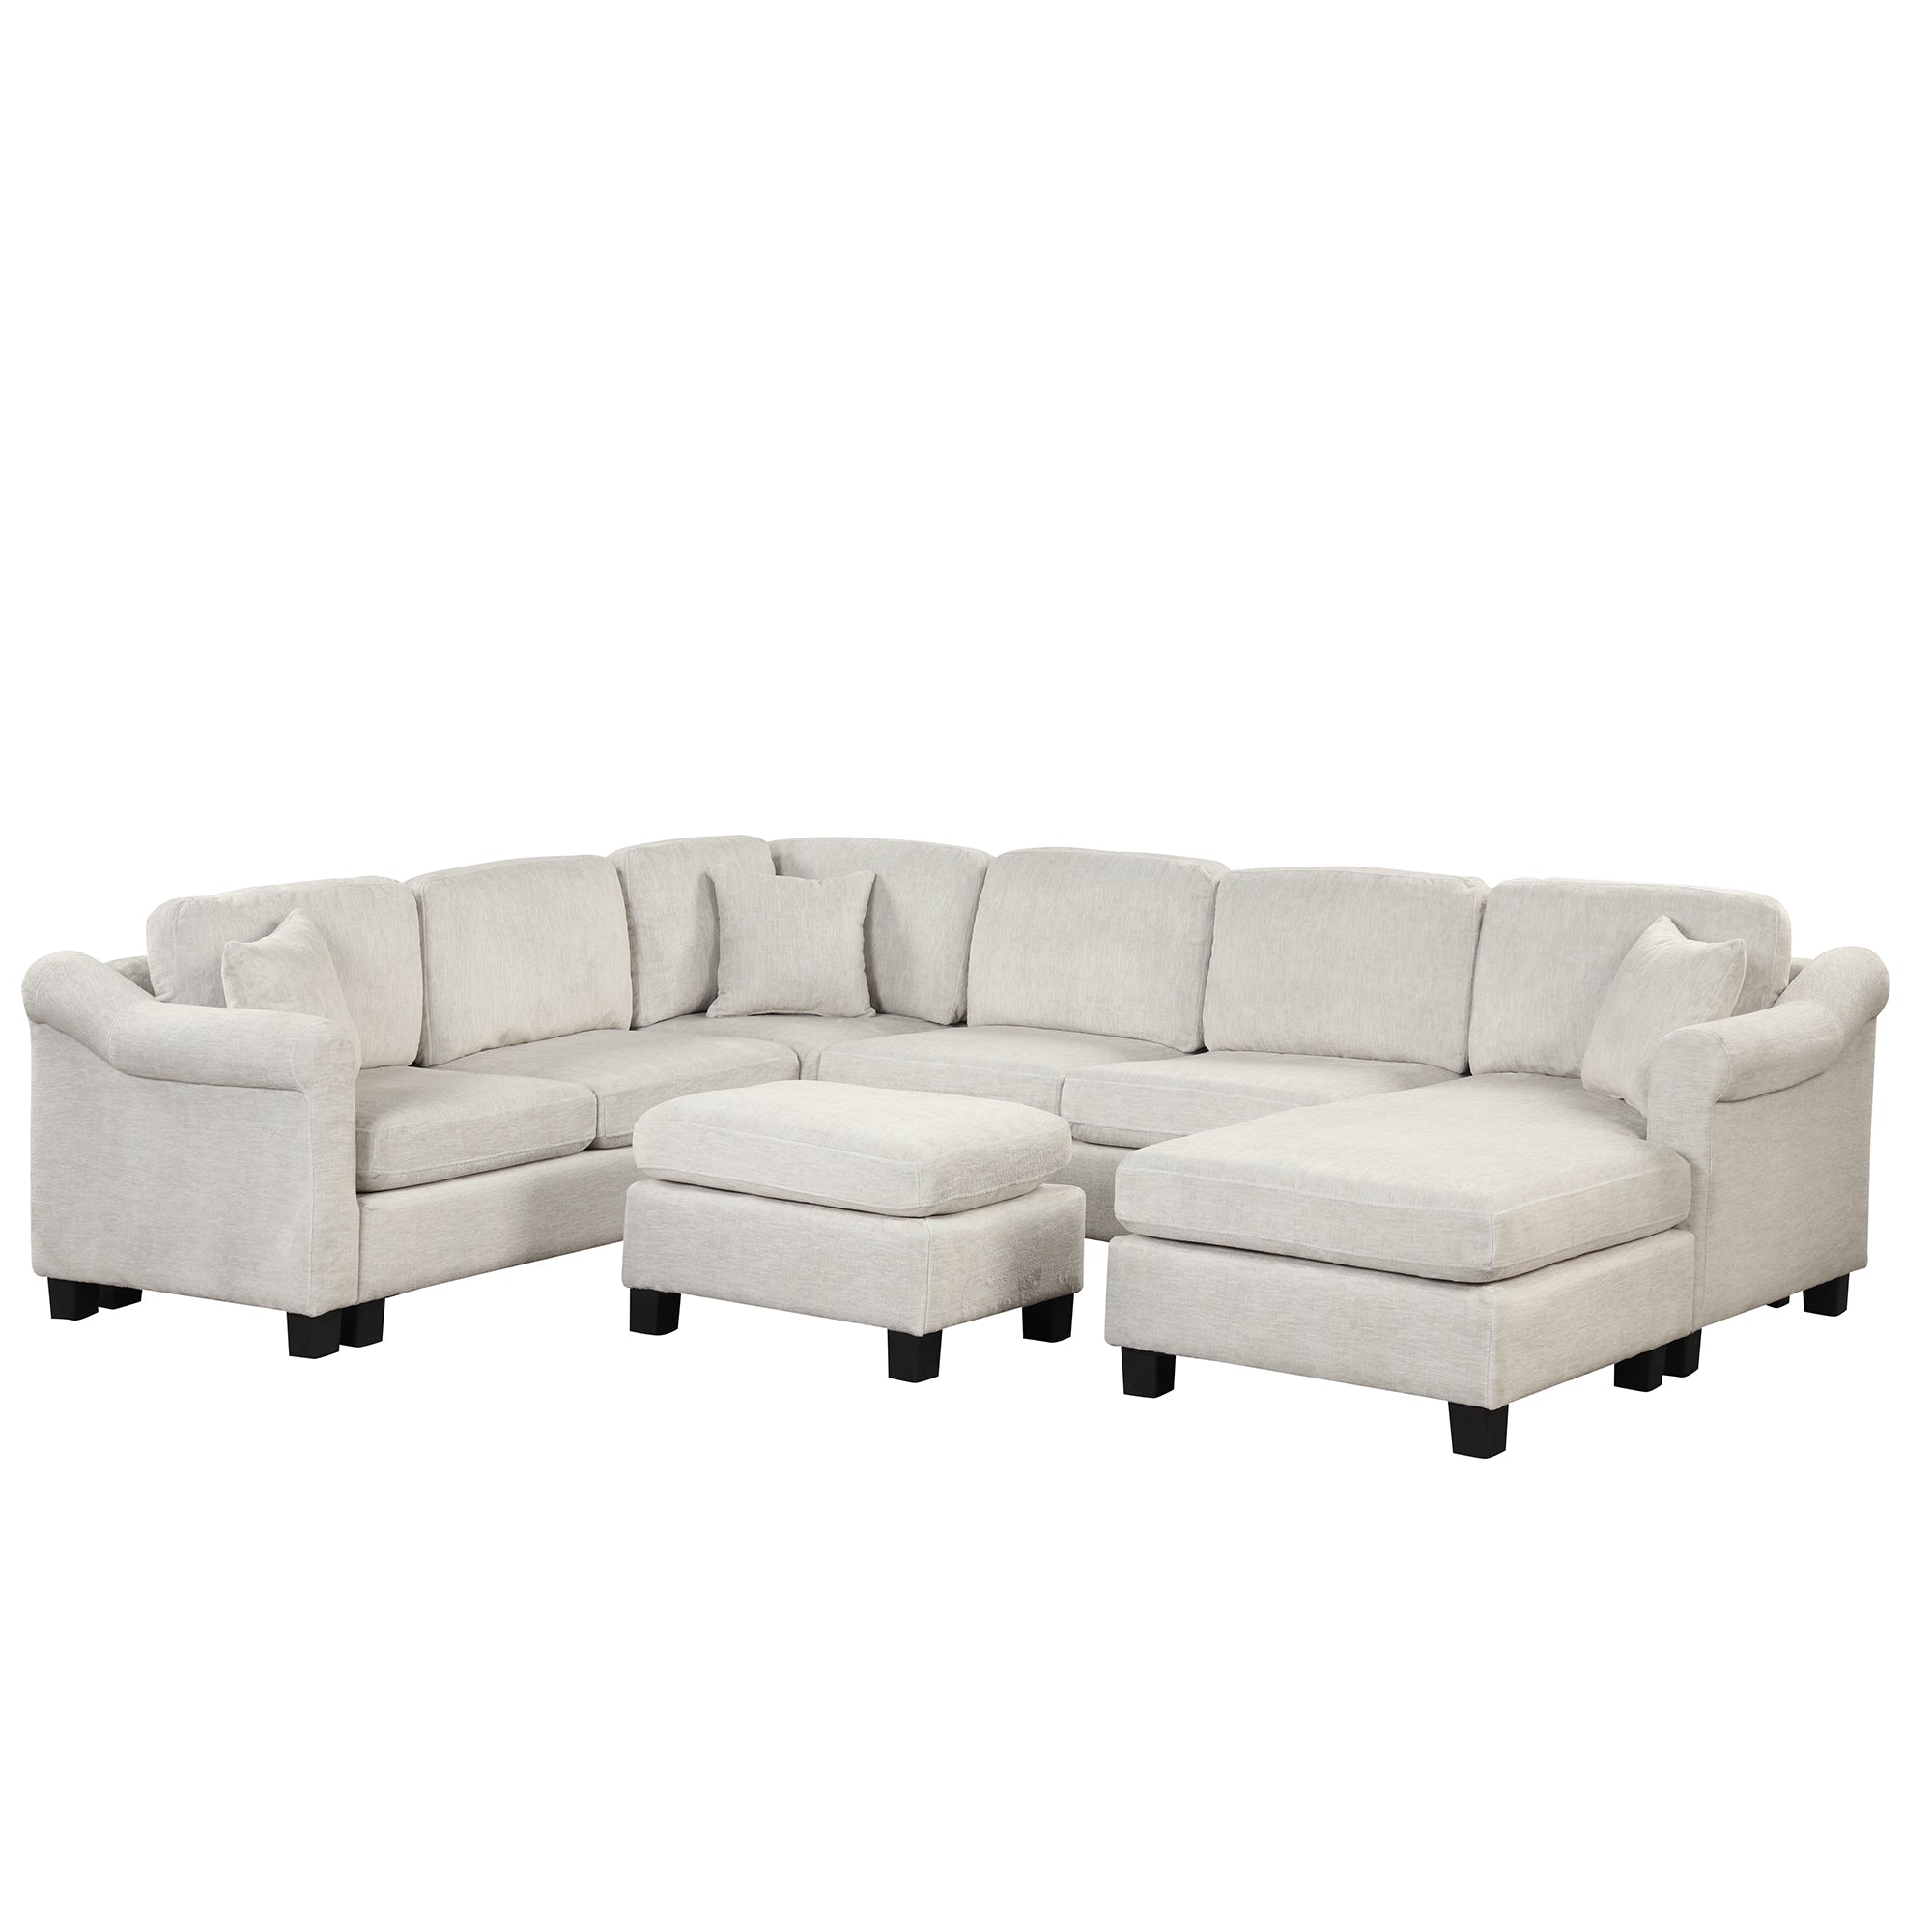 White Large Velvet U Shaped Sectional Sofa w/ Ottoman & Chaise-Stationary Sectionals-American Furniture Outlet